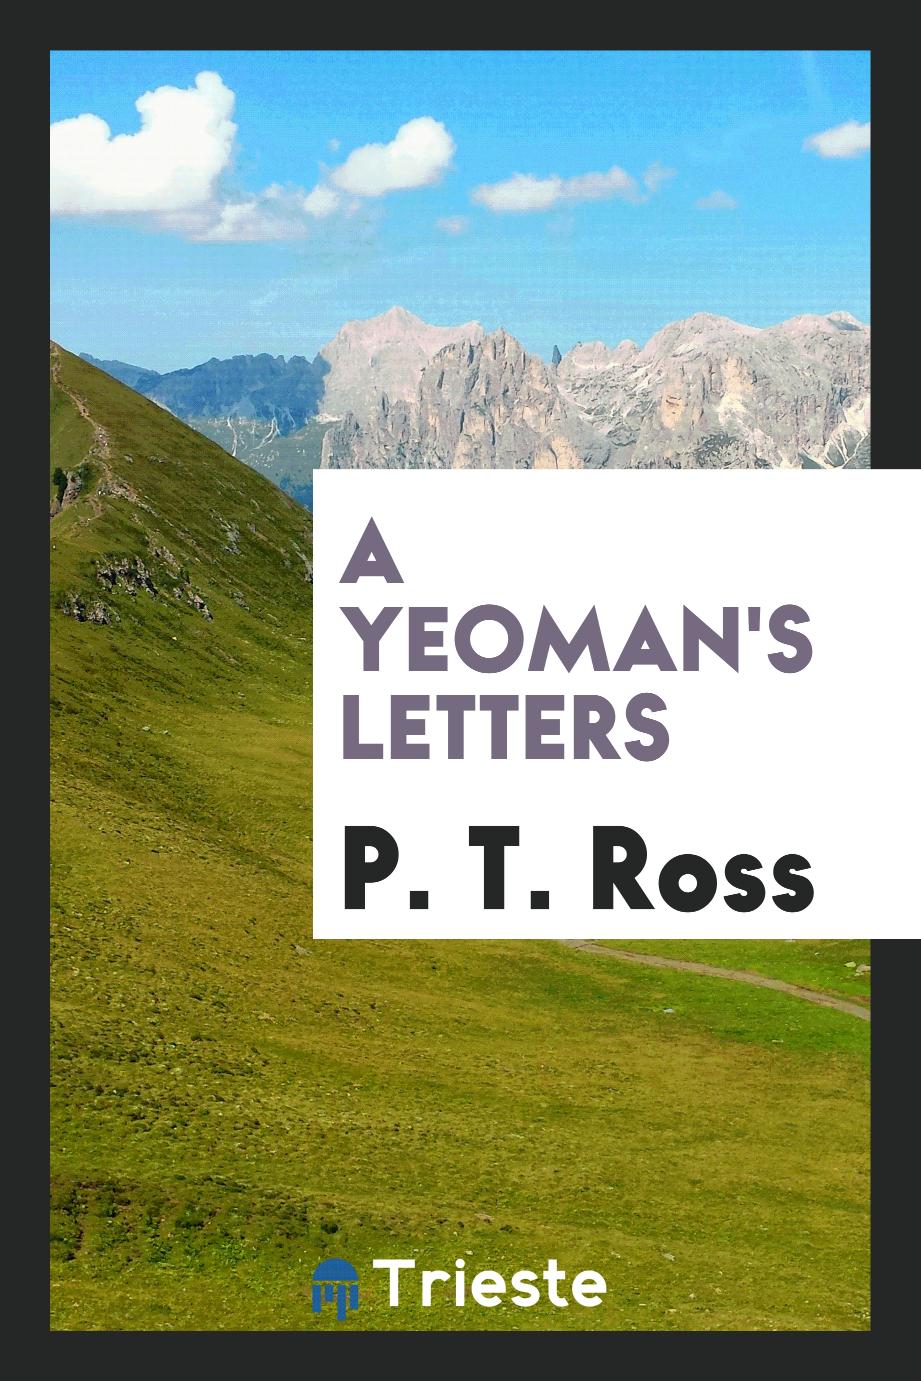 A yeoman's letters